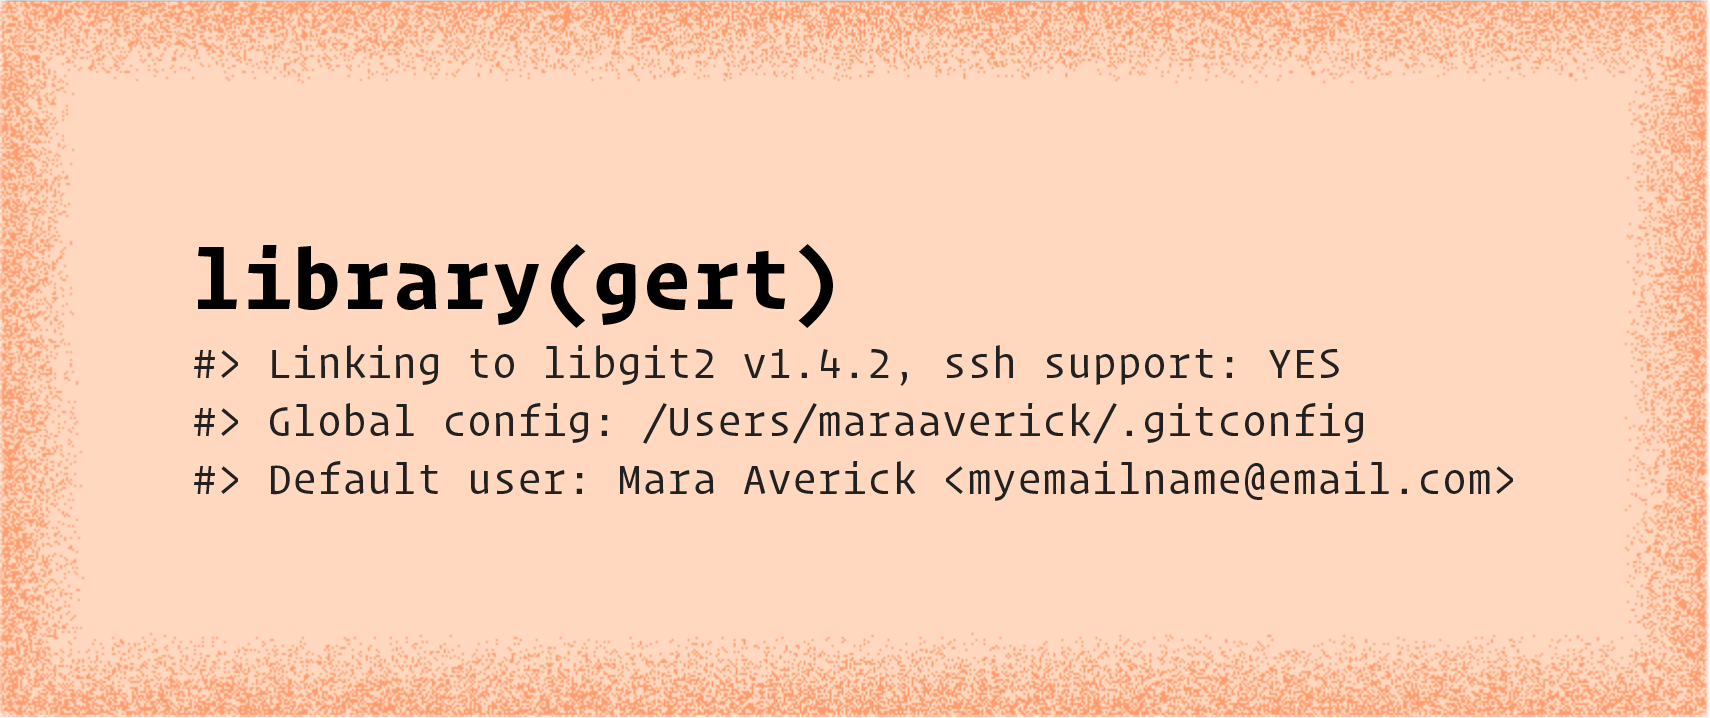 library(gert) followed by output in slightly lighter shade that reads: Linking to libgit2 v1.4.2, ssh support: YES; Global config: /Users/maraaverick/.gitconfig; Default user: Mara Averick &lt;myemailname@email.com>.